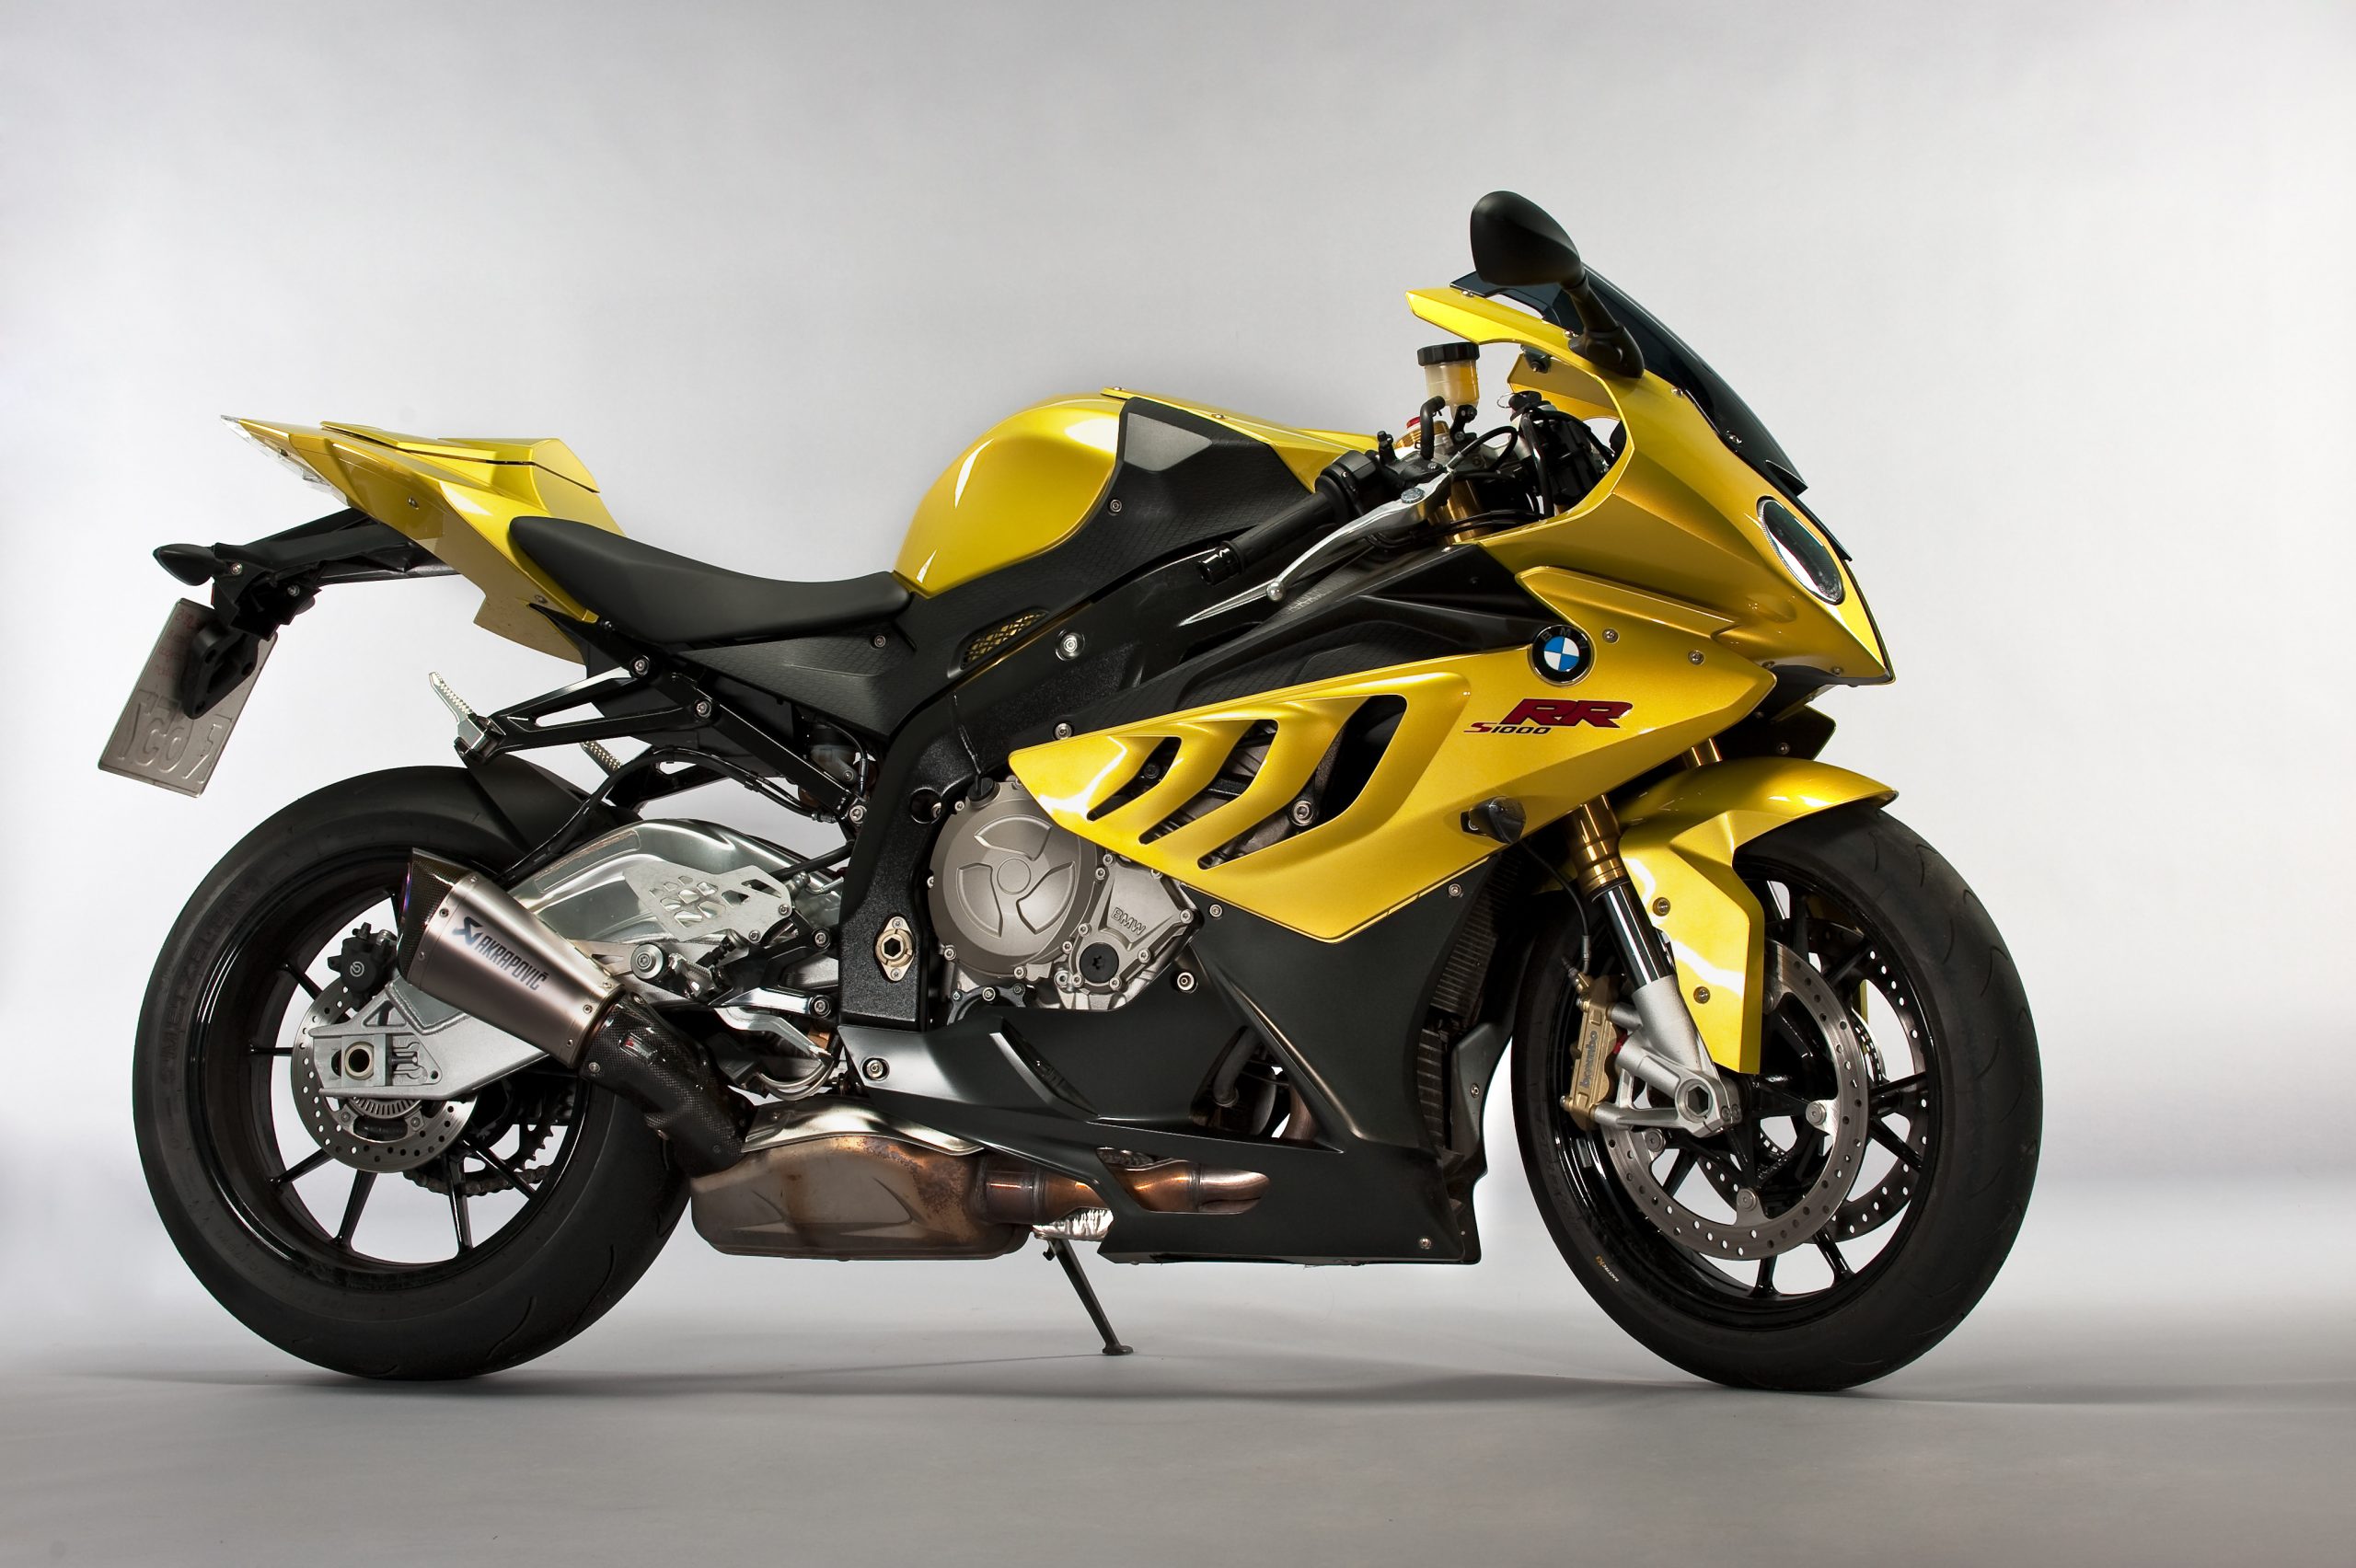 2013 BMW S1000RR - Motorcycle Reviews, Specs and Prices